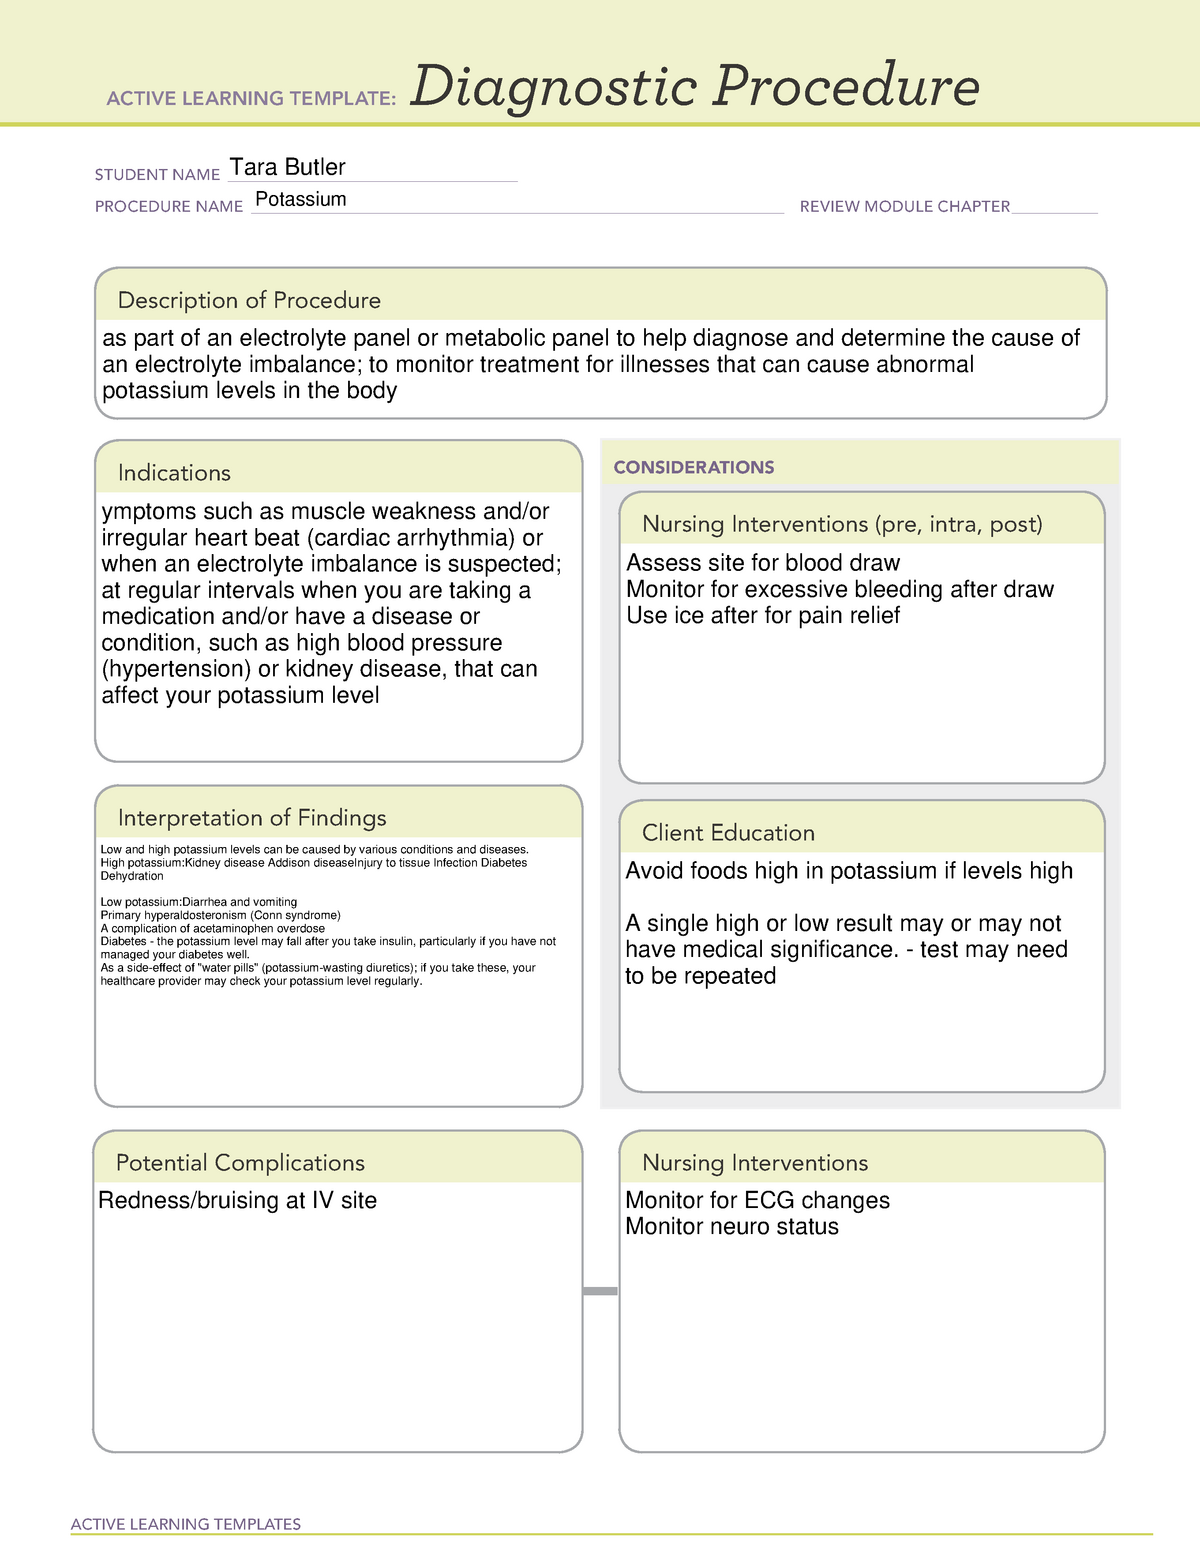 Ati Diagnostic Template For Fluid And Electrolytes